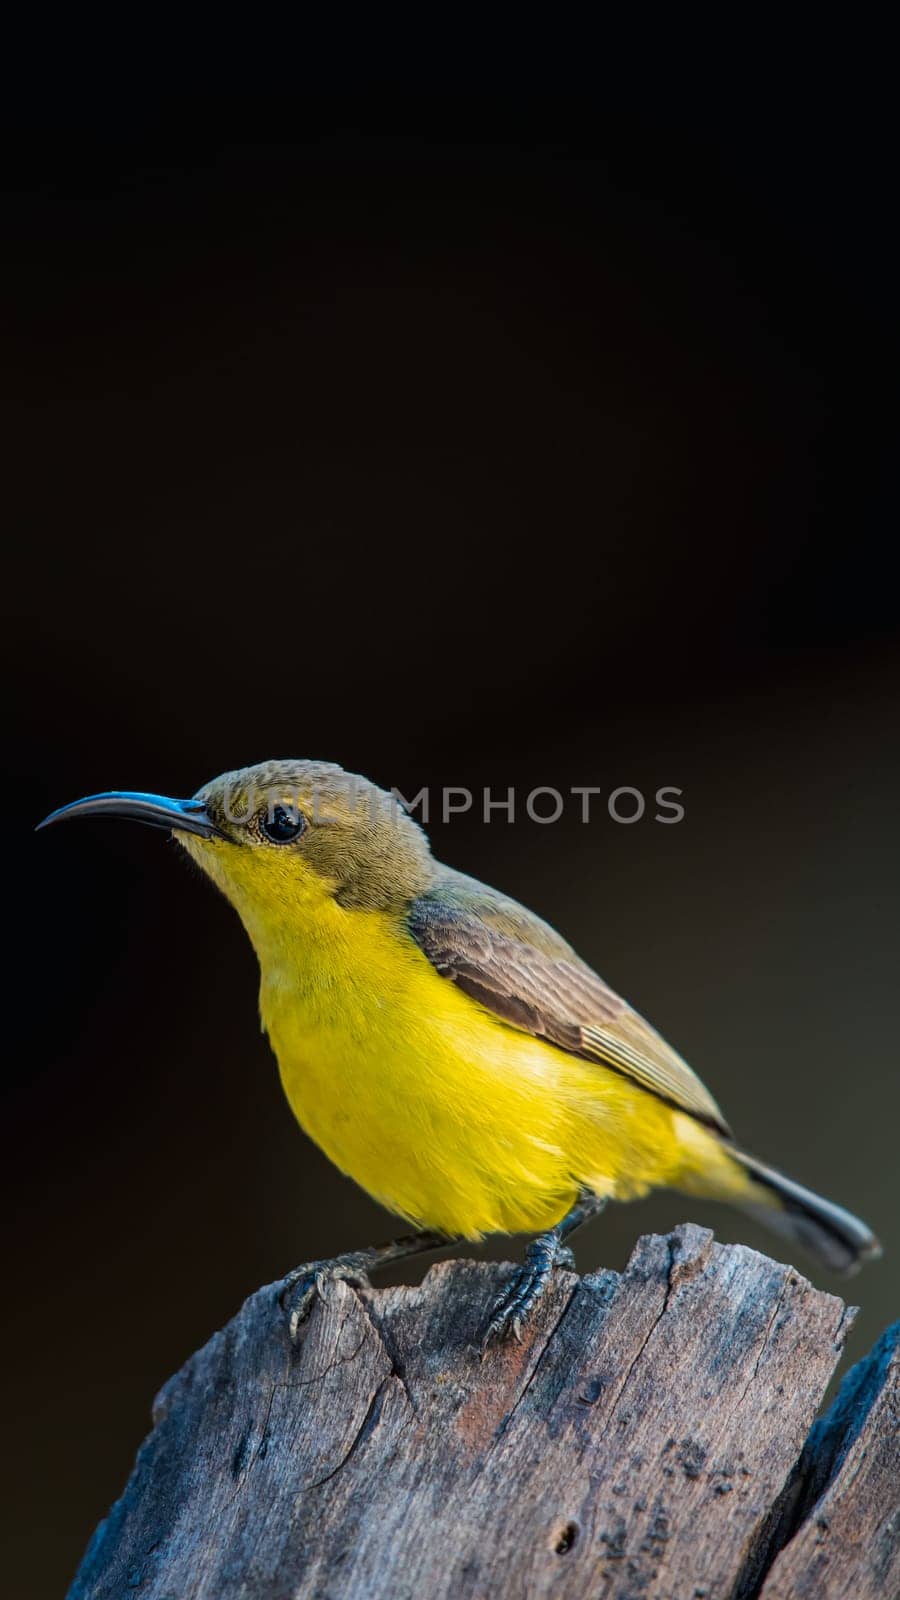 Bird (Olive-backed sunbird, Yellow-bellied sunbird) female yellow color perched on a tree in a nature wild